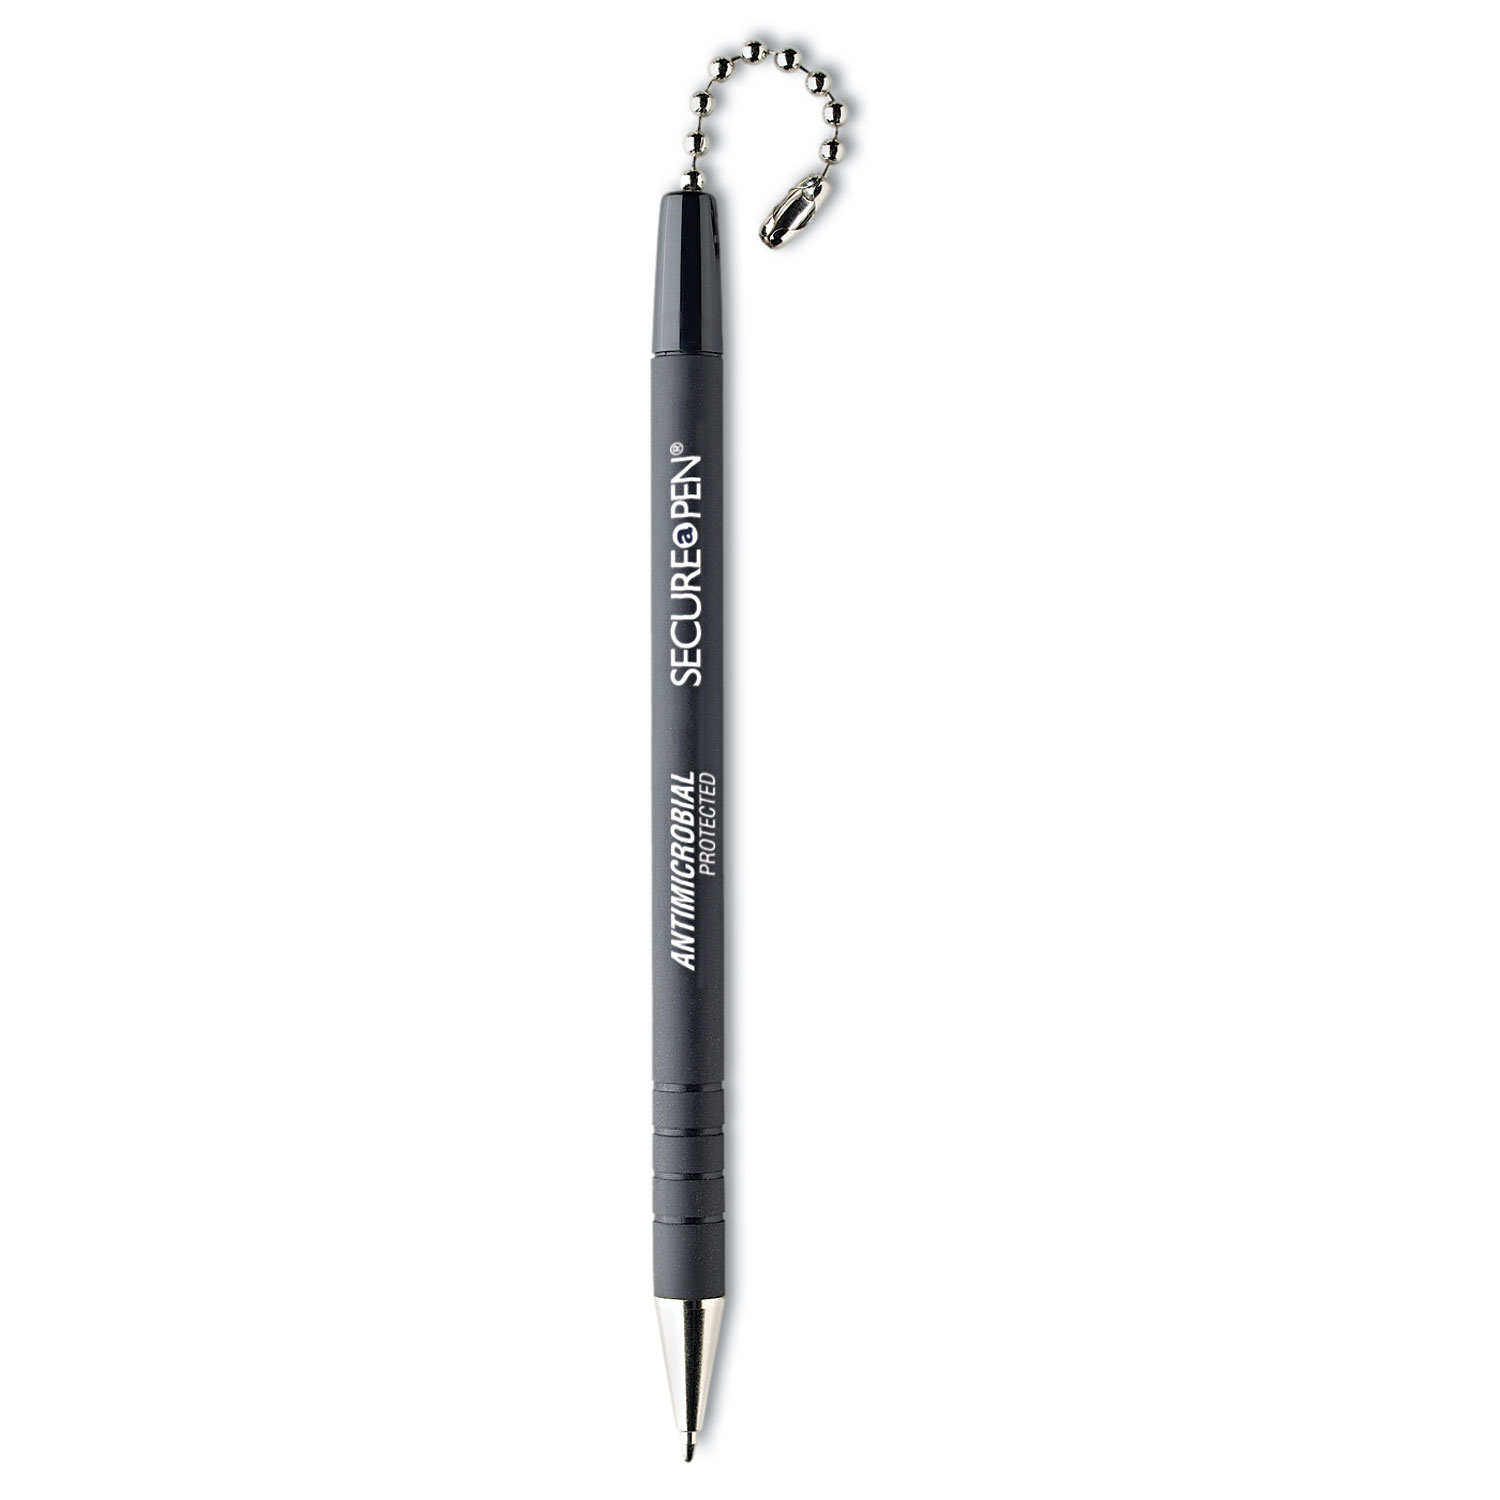  MMF Industries 28704 Replacement Ballpoint Pen for the Secure-A-Pen System, 1mm, Black Ink/Barrel (MMF28704) 